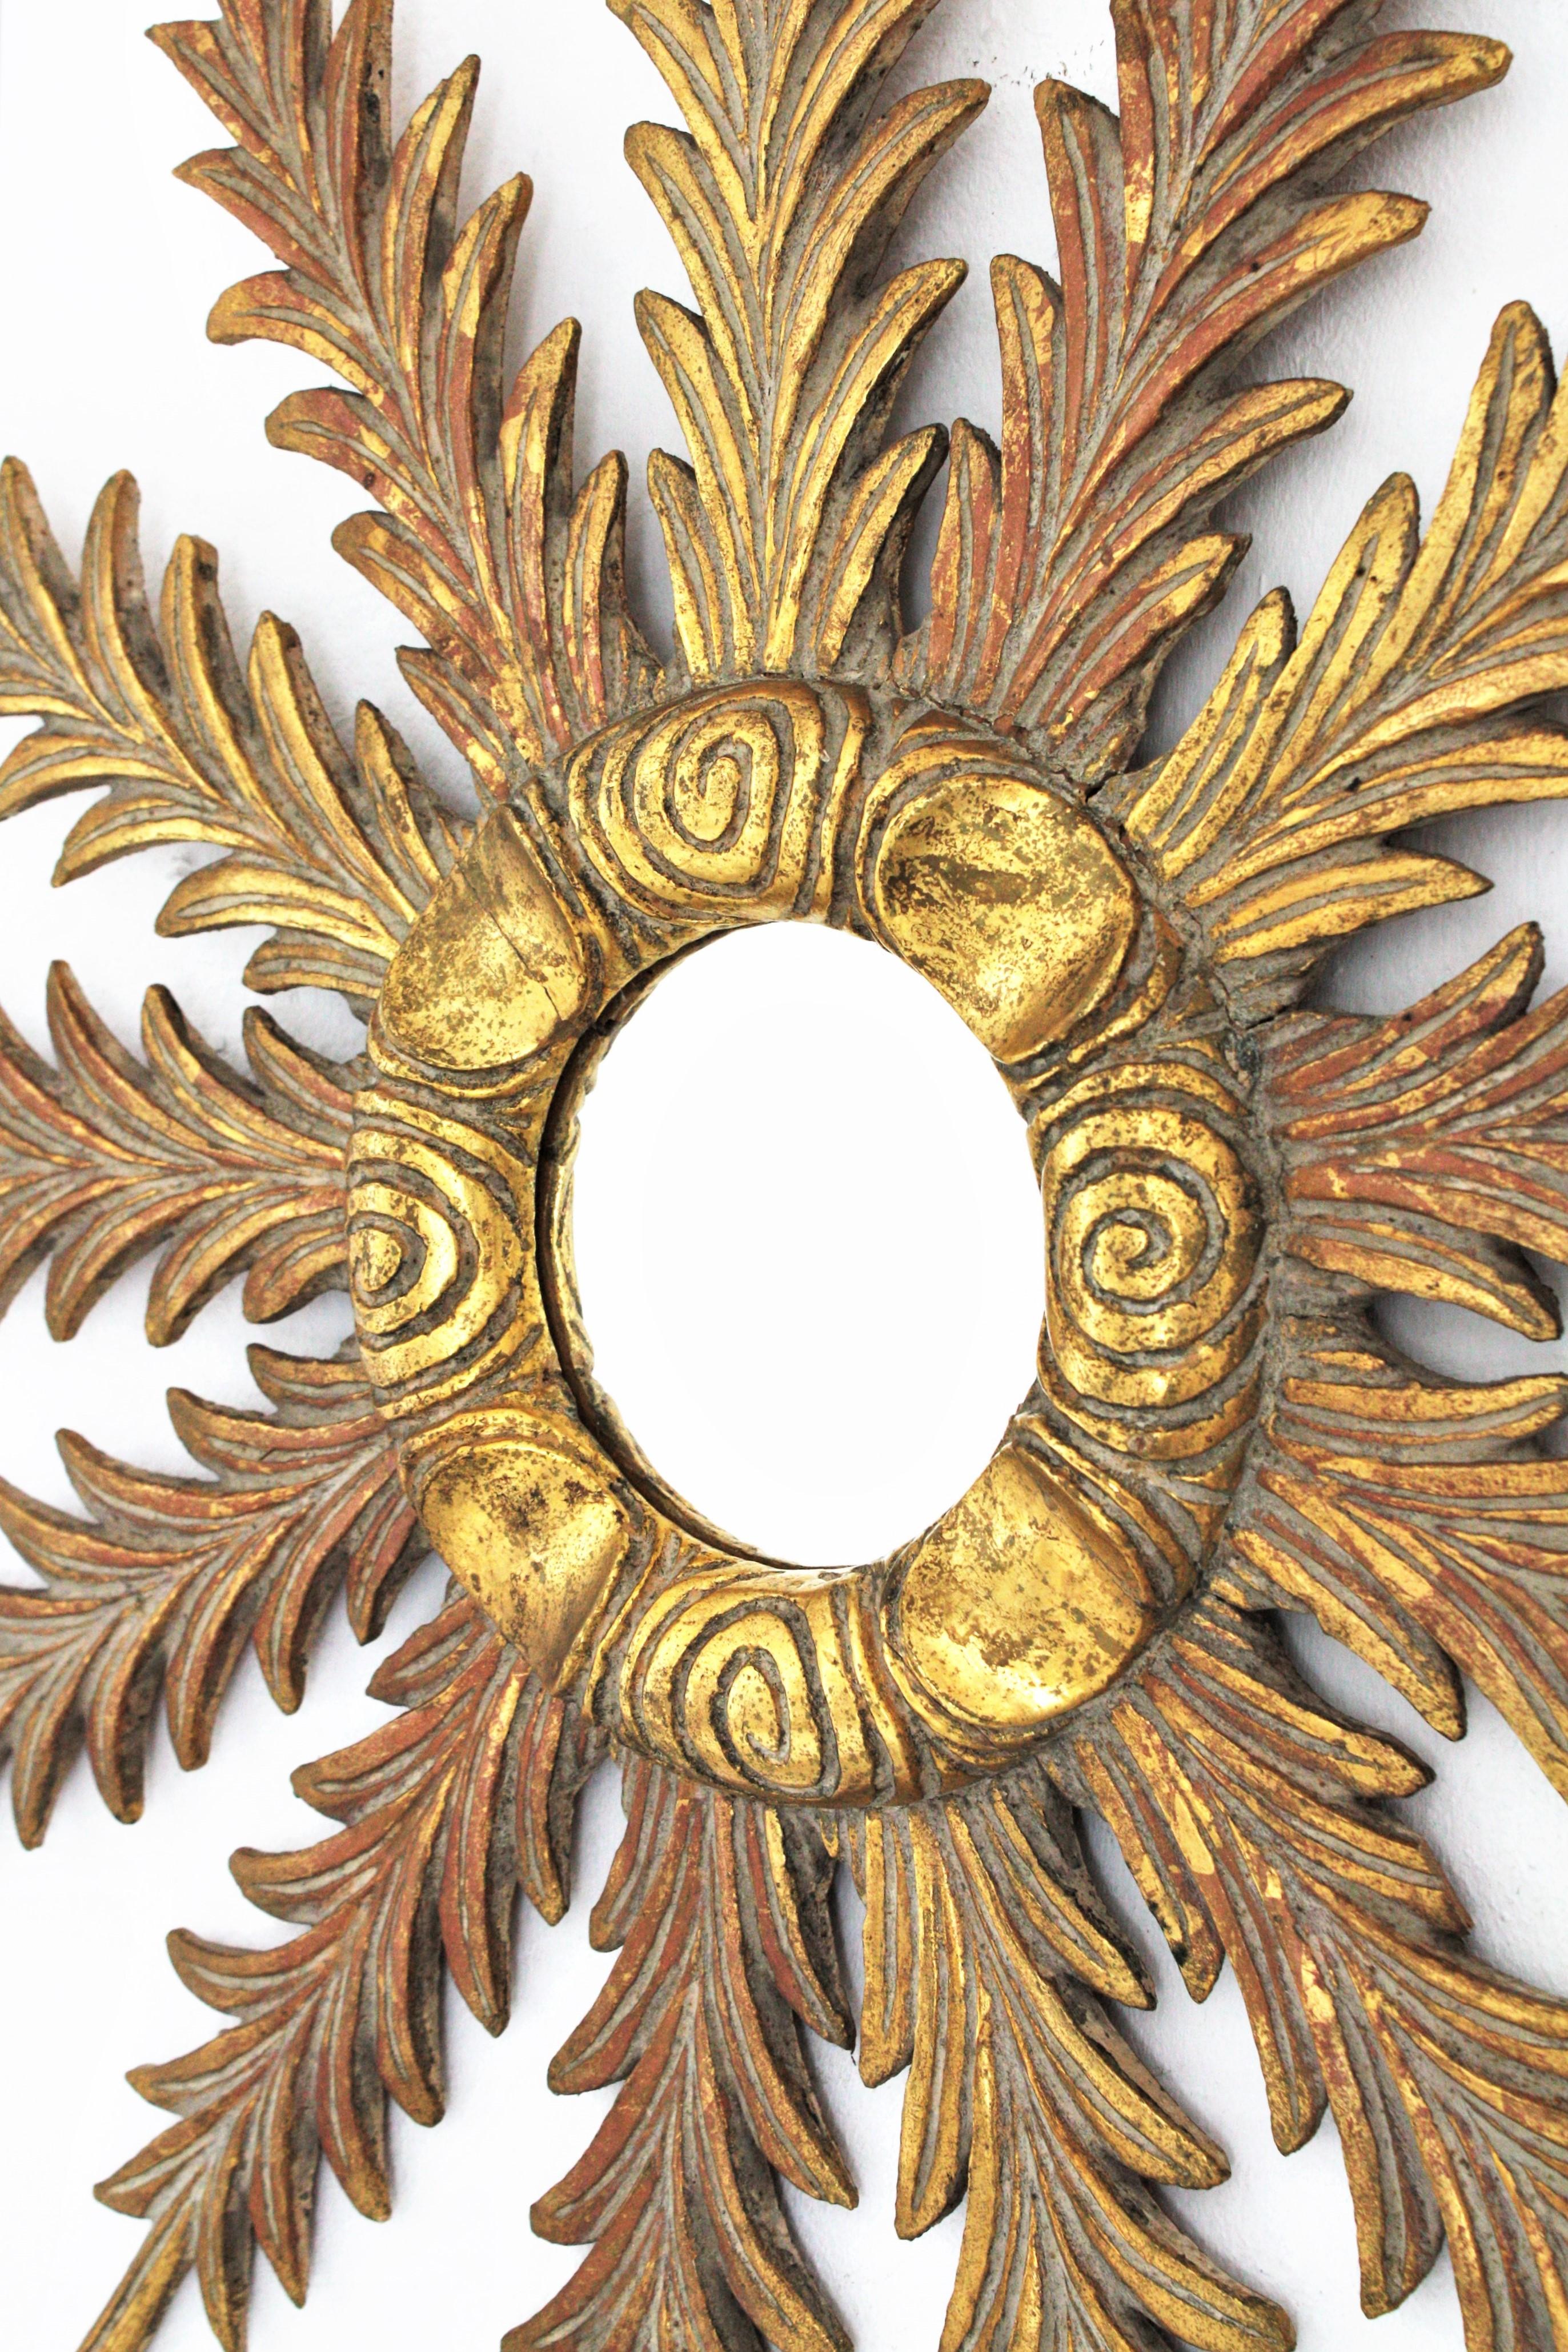 Carved Sunburst Starburst Giltwood Mirror with Foliage Carvings, 1940s For Sale